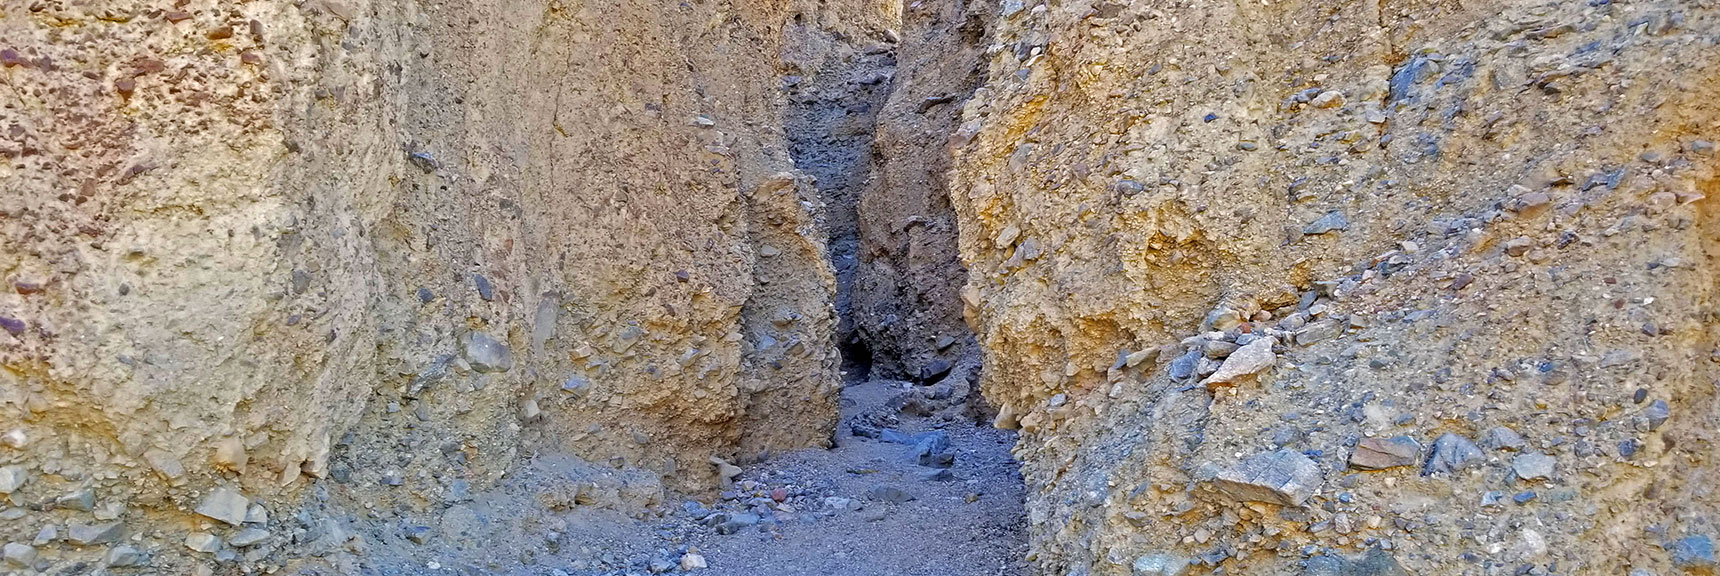 Continuing Up Narrow Channel of the Second Unofficial Slot | Sidewinder Canyon | Death Valley National Park, California